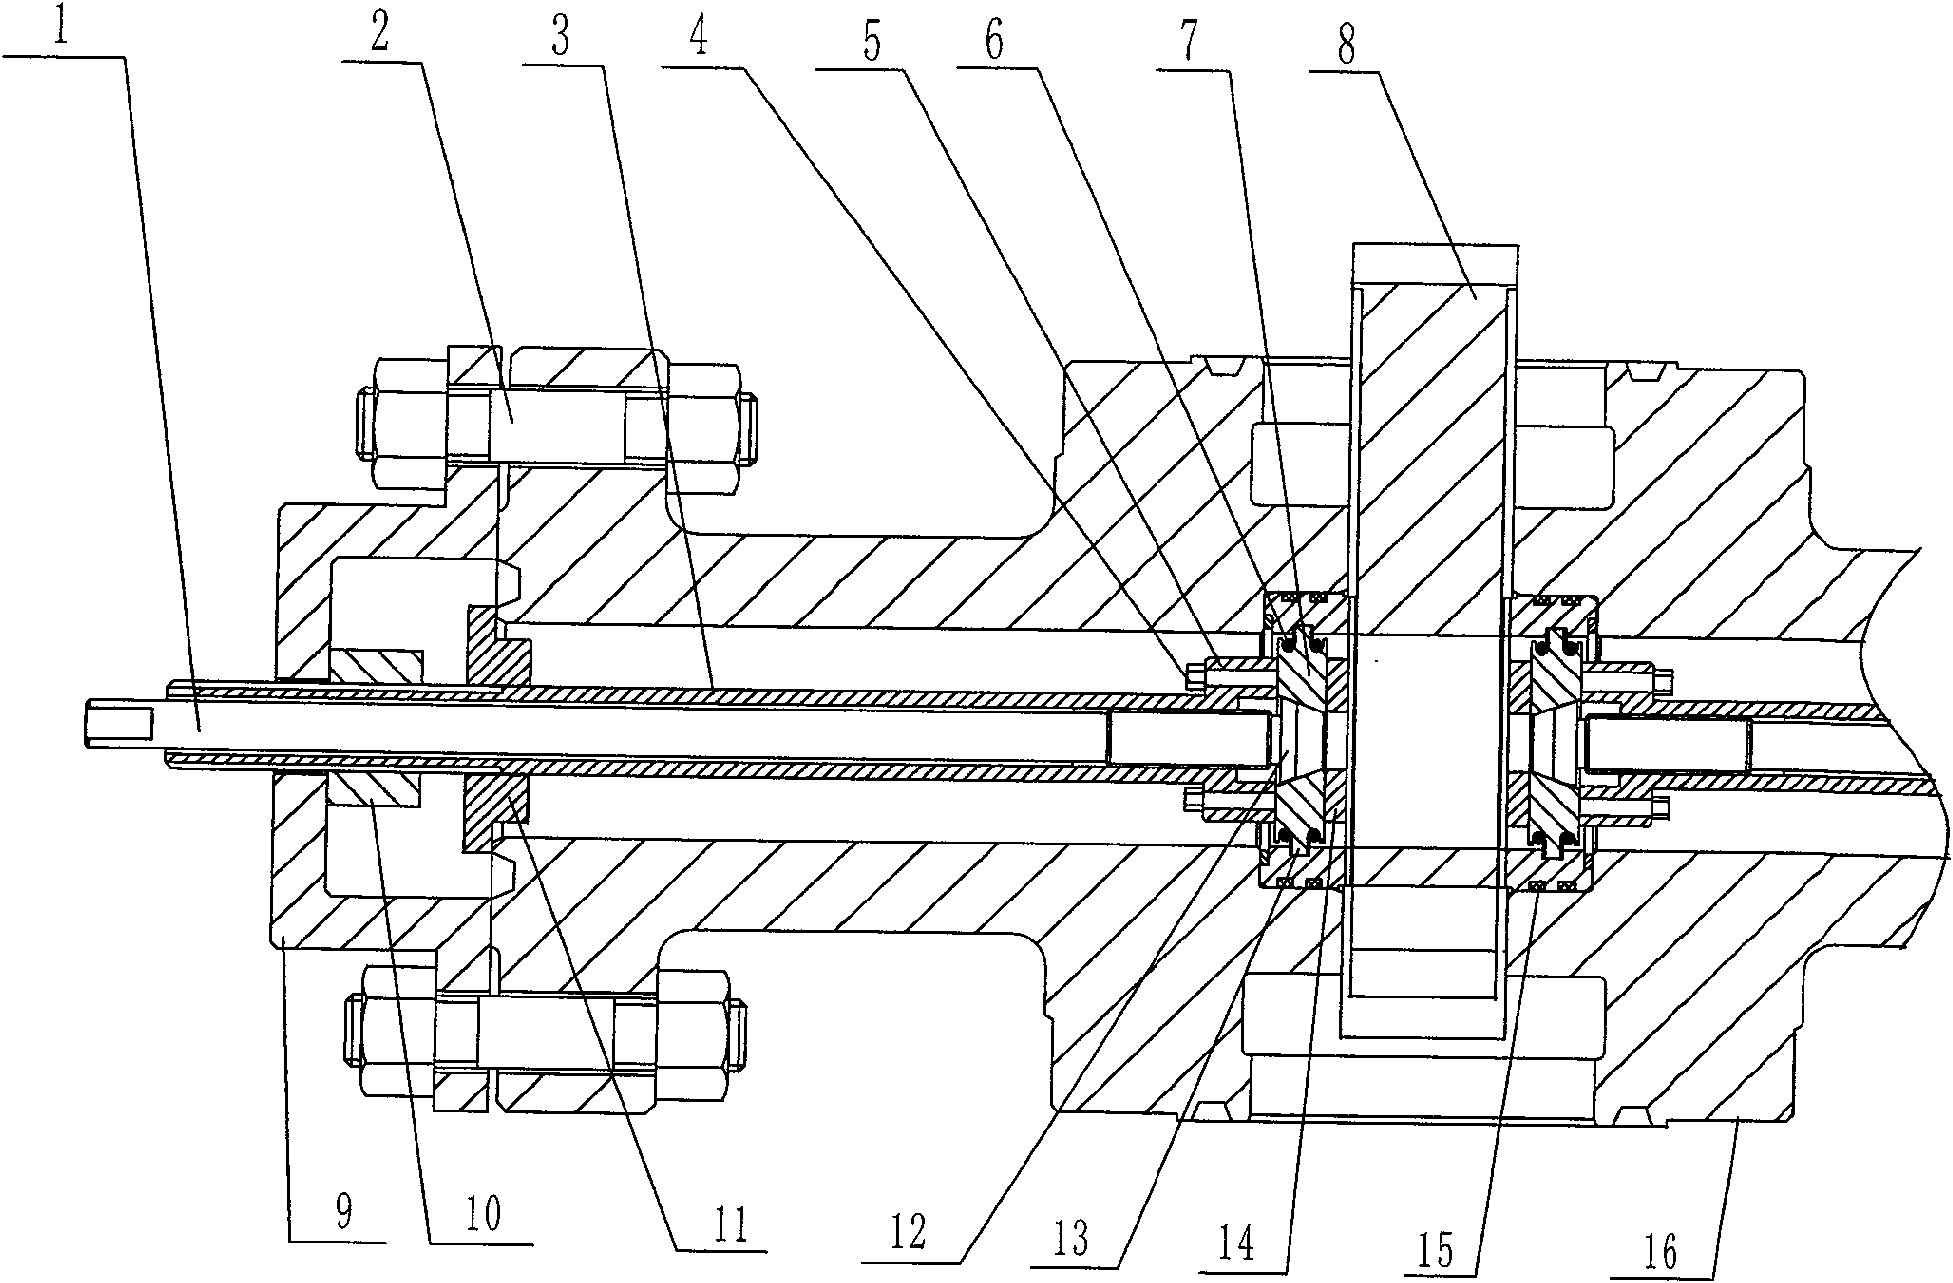 Detaching and assembling tool for gate valve plate and seat